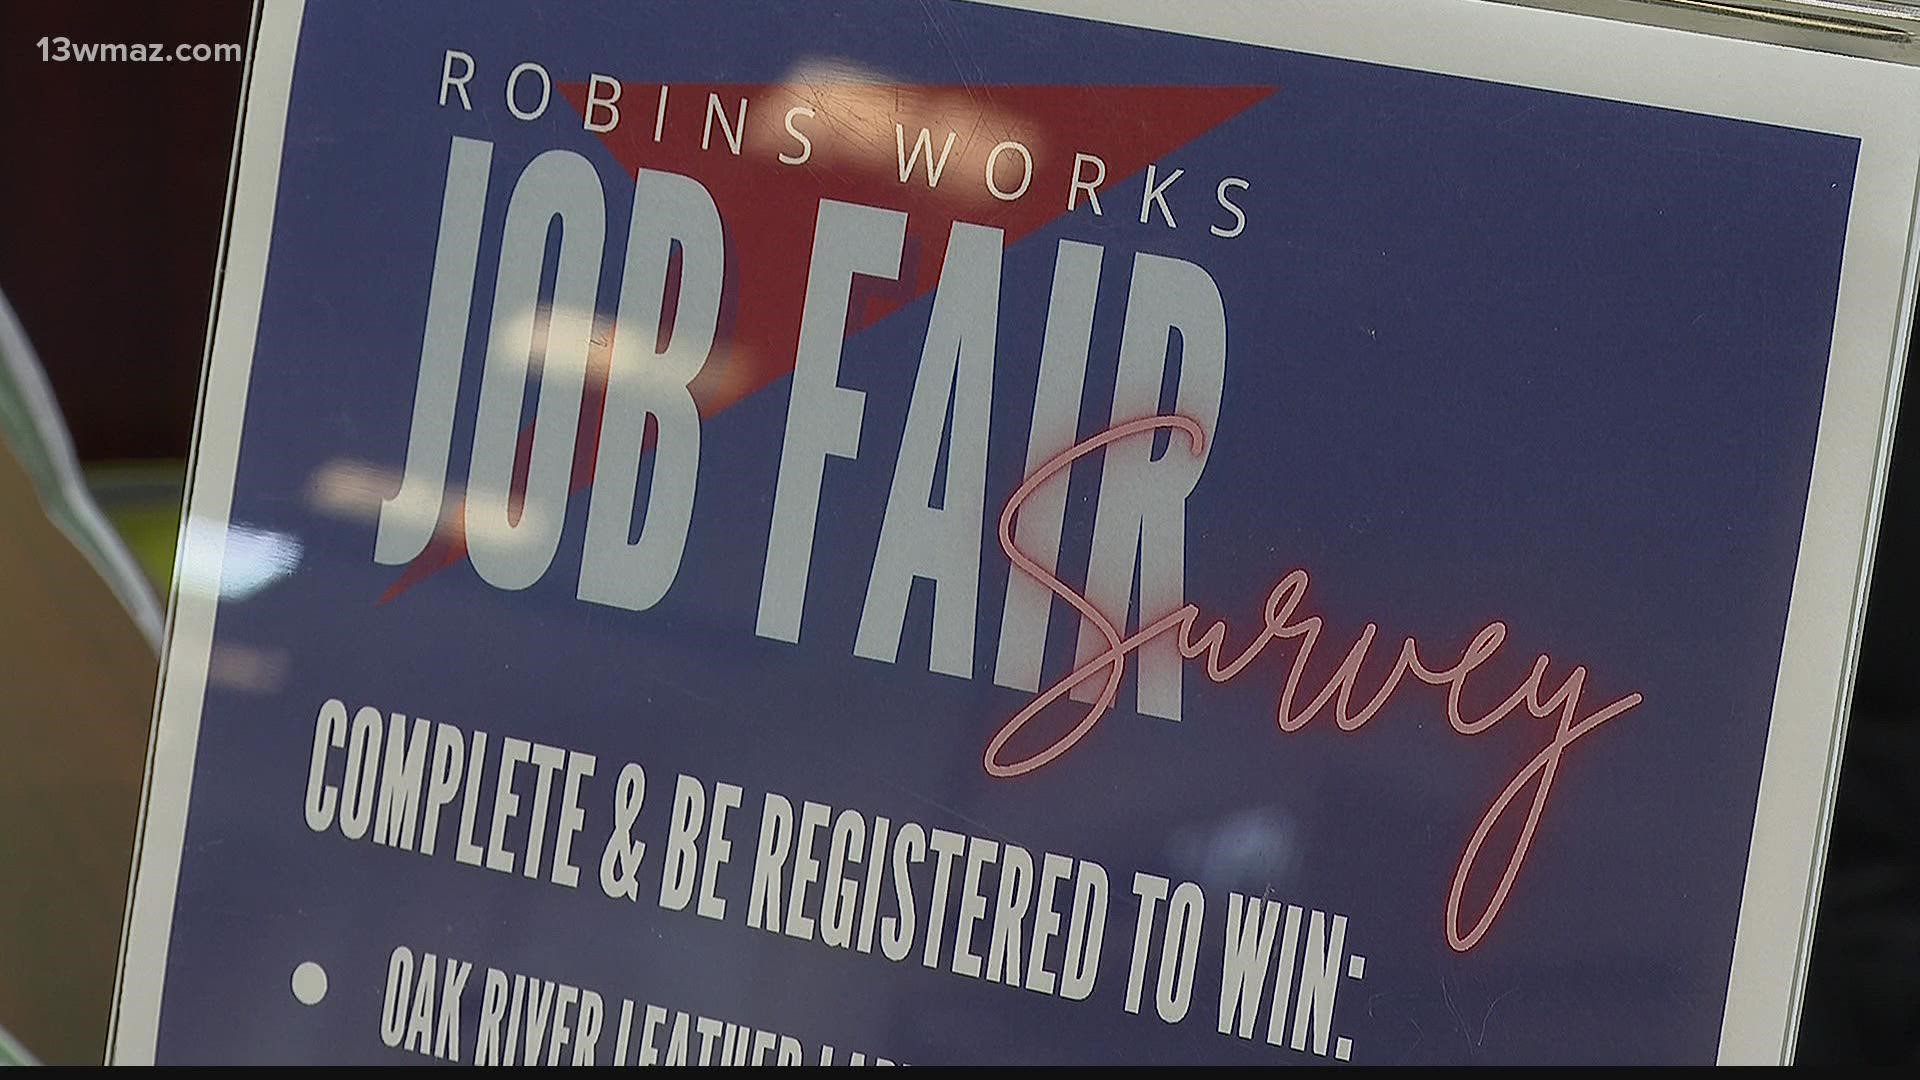 Jobs opportunities include Robins Air Force Base, the school system, the hospital, senior living homes, and more.